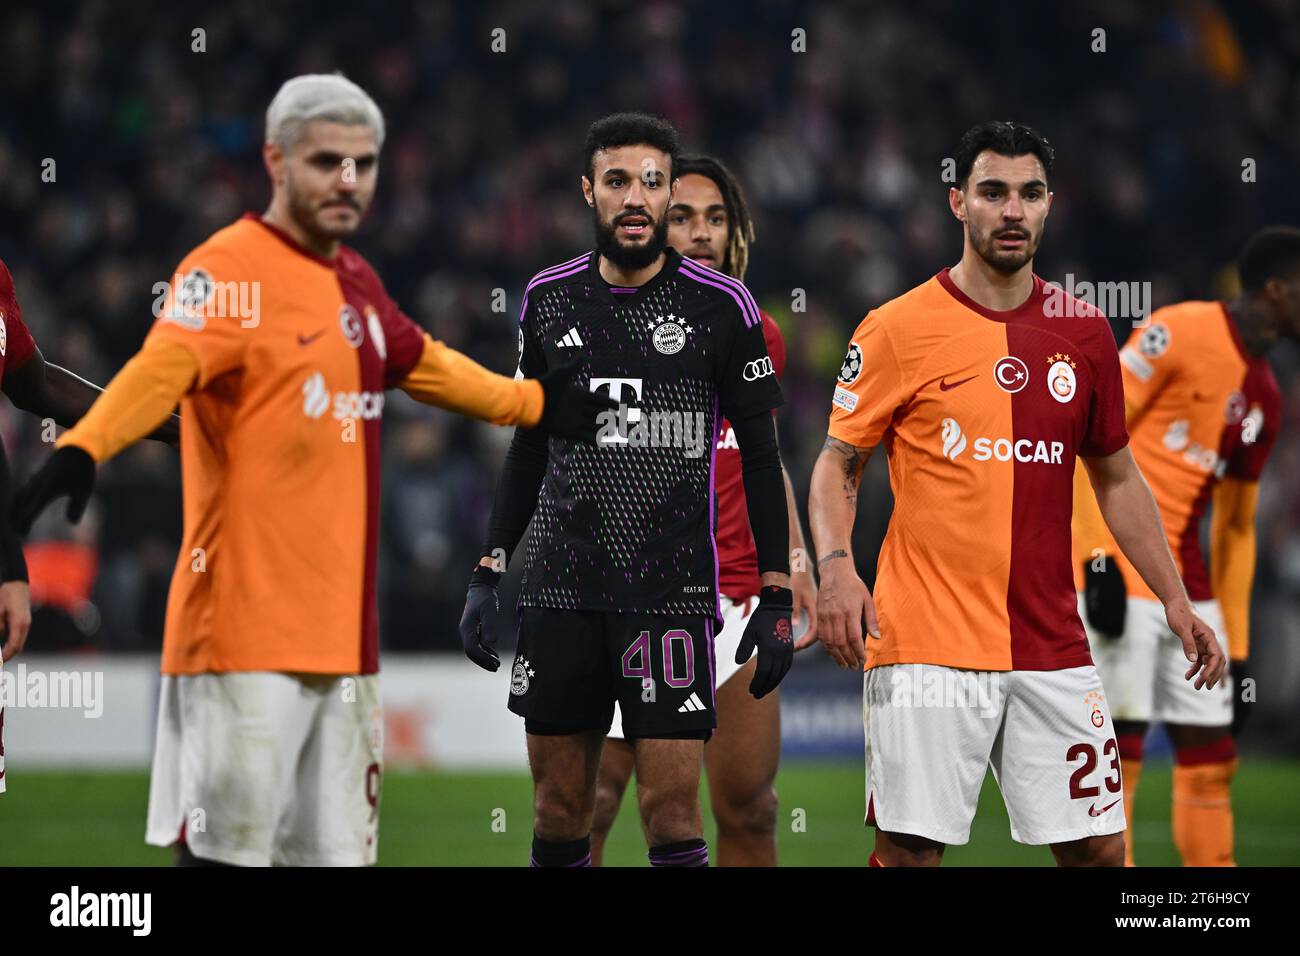 MUNICH, GERMANY - NOVEMBER 8: Noussair Mazraoui of Bayern Munich and Kaan Ayhan of Galatasaray during the UEFA Champions League match between FC Bayer Stock Photo